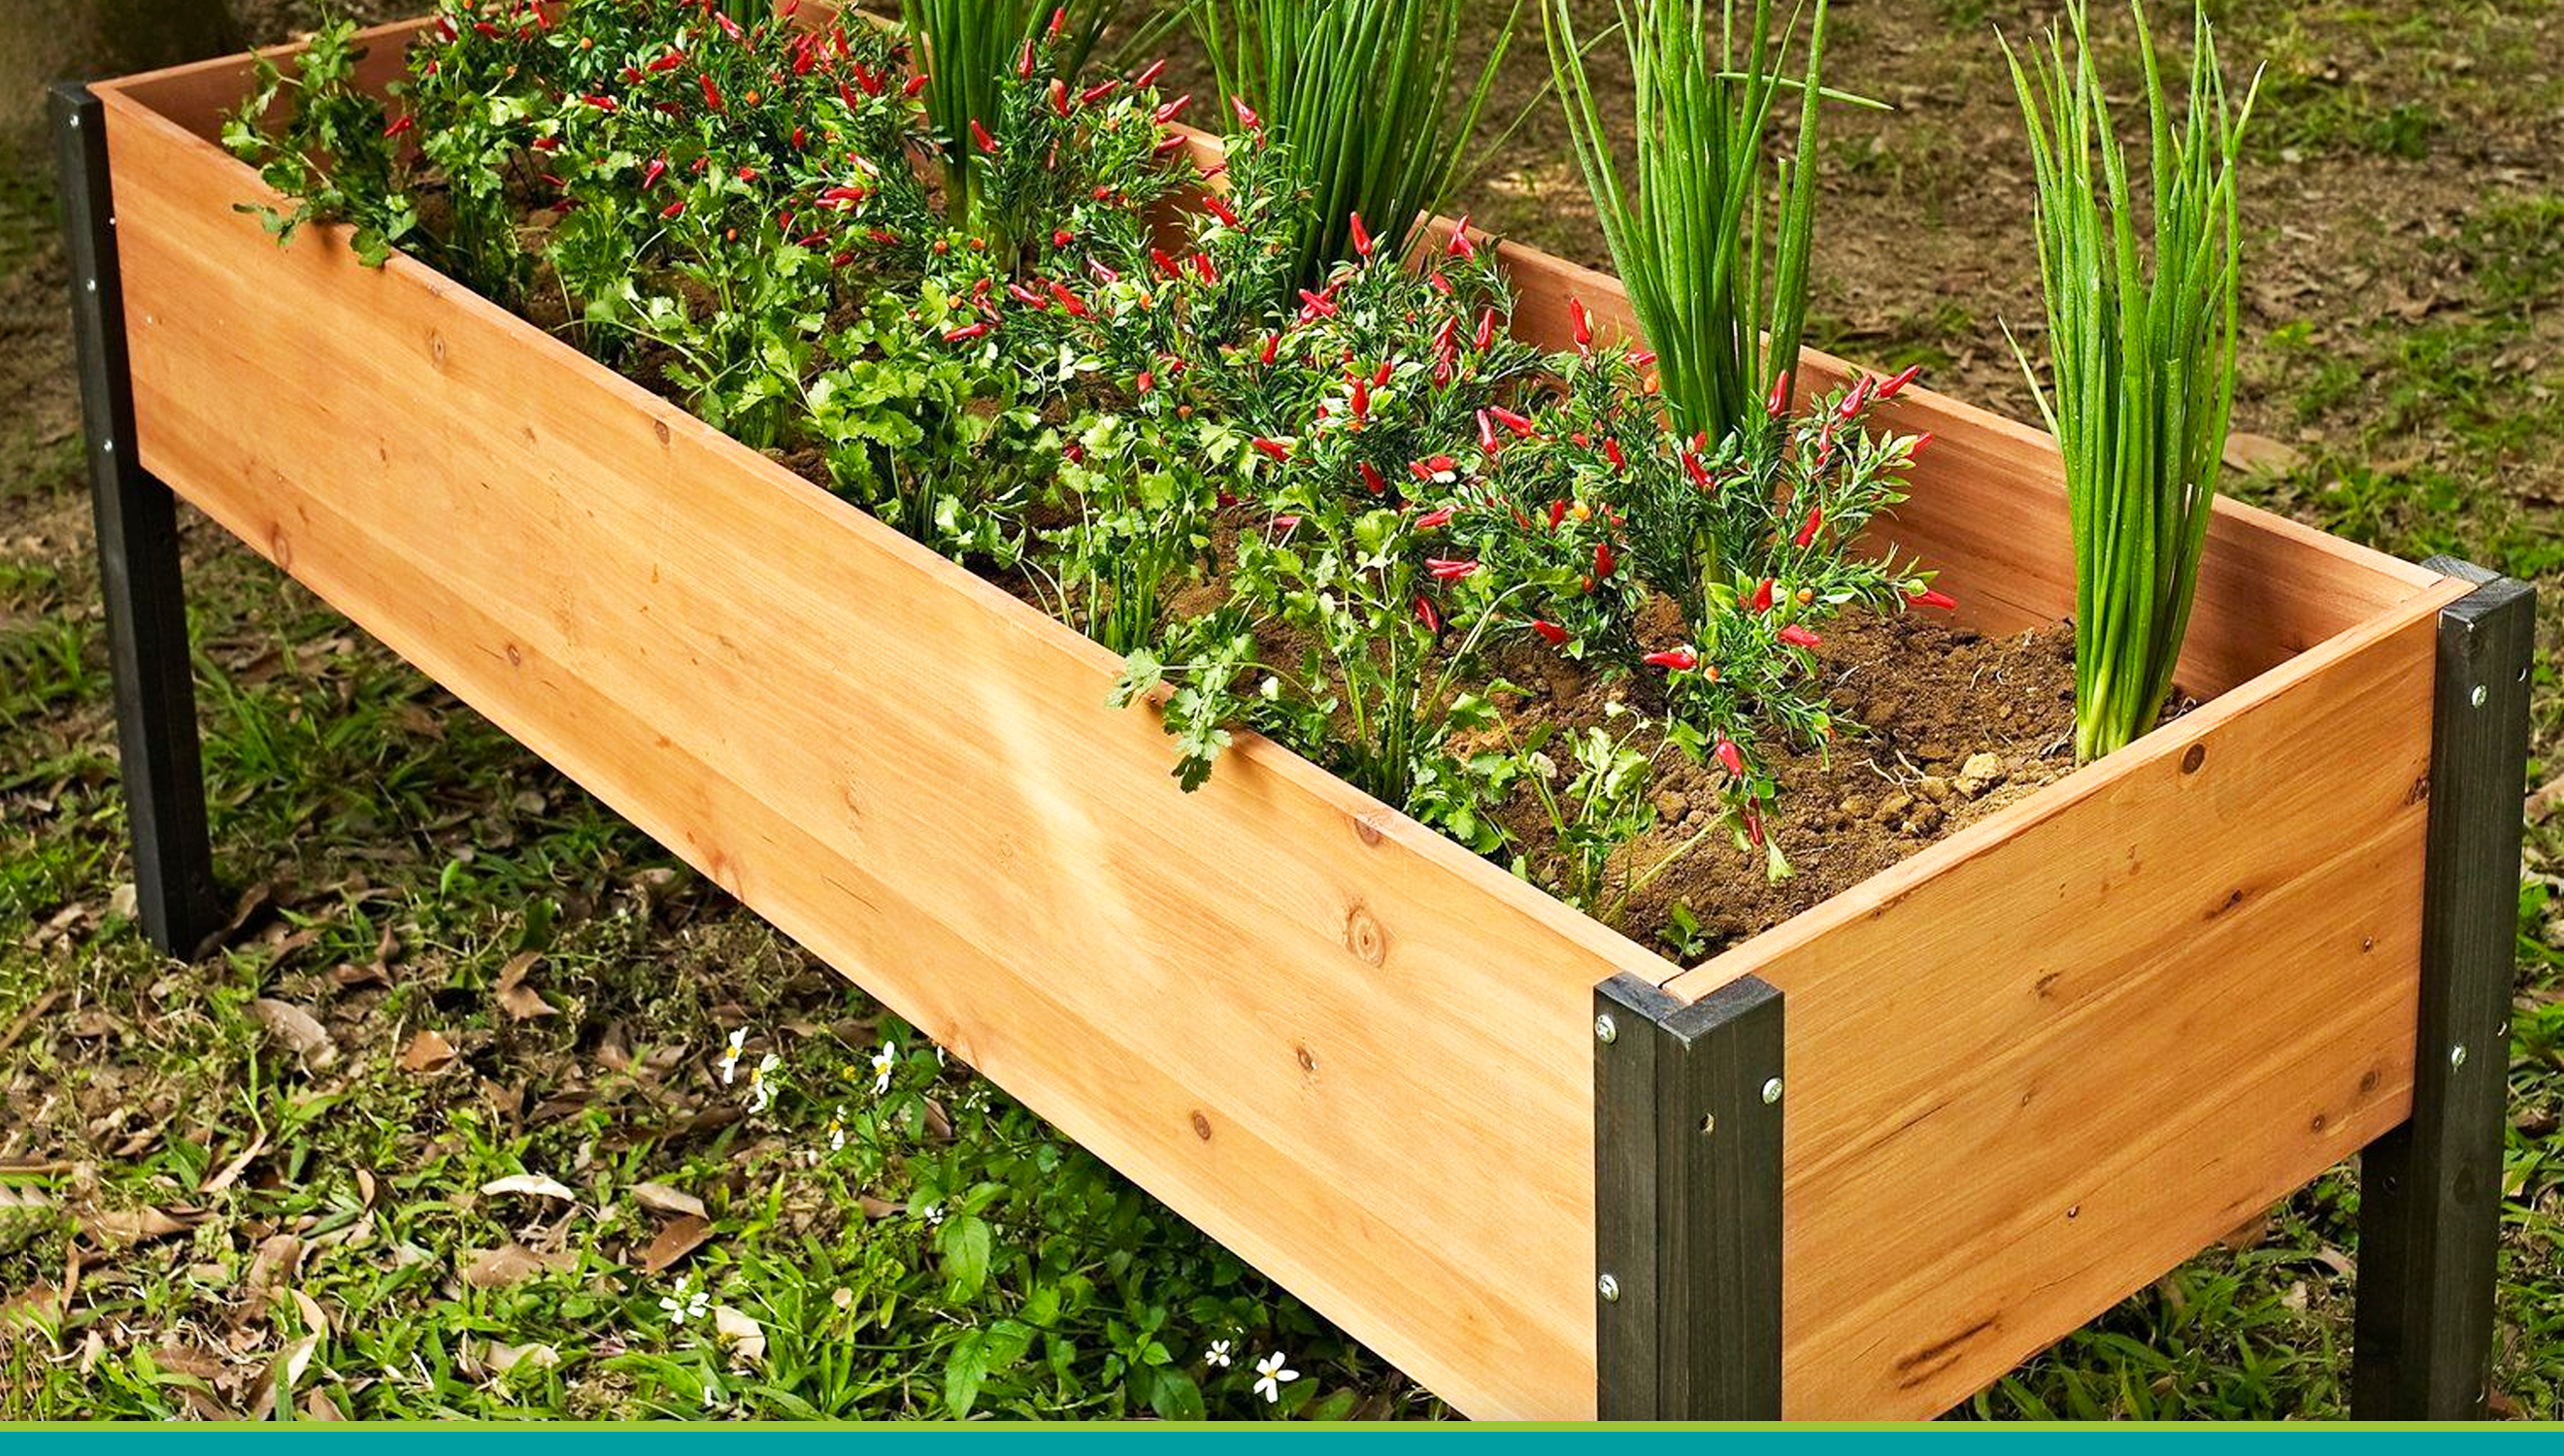 12 Excellent Reasons to Garden in Raised Beds!